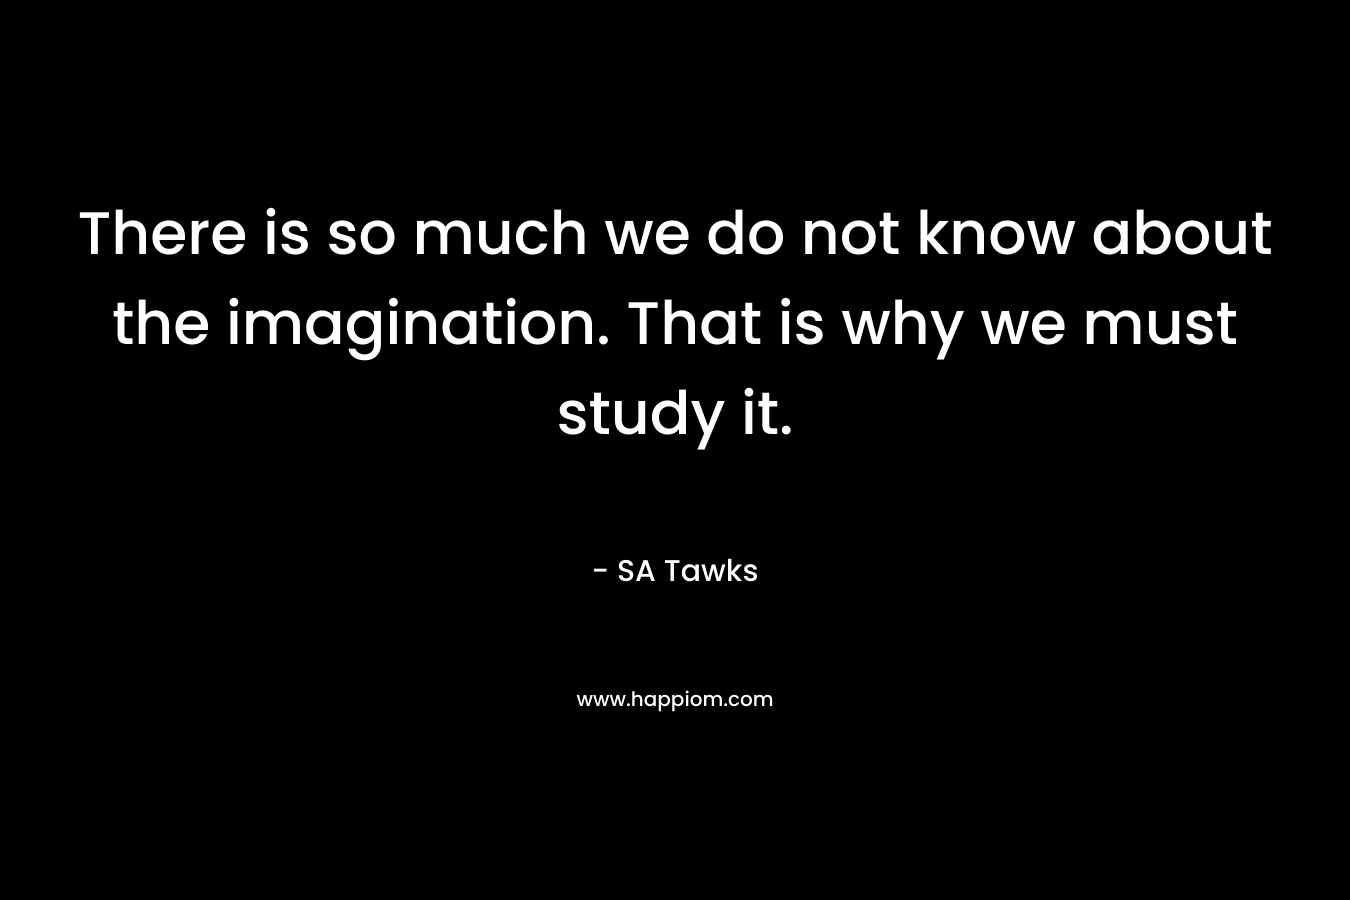 There is so much we do not know about the imagination. That is why we must study it.